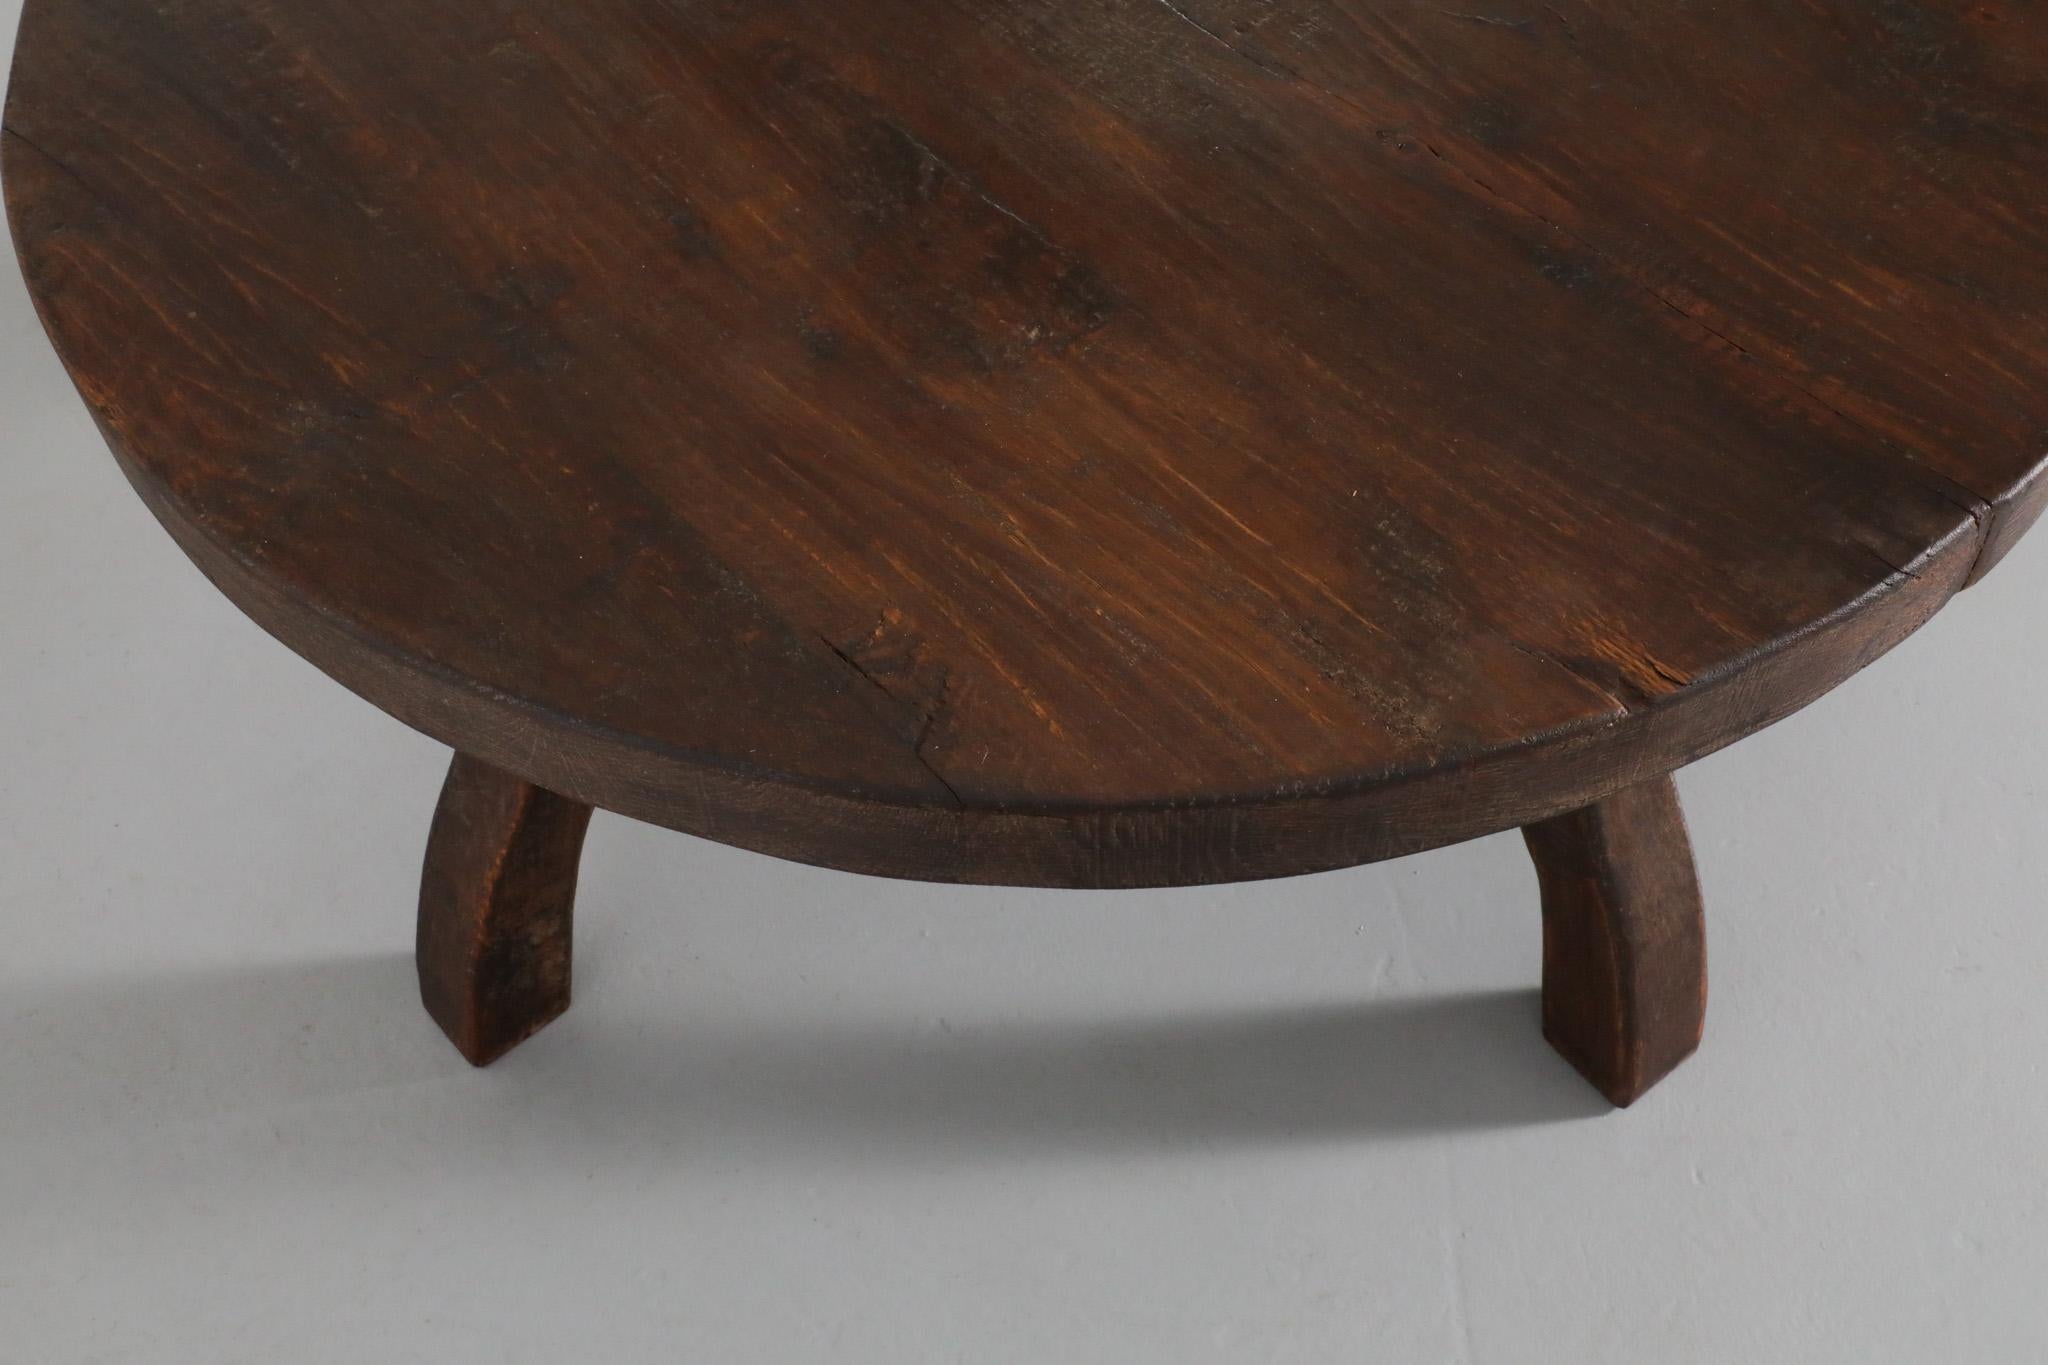 Pierre Chapo Style Brutalist Oak Coffee Table with Curved Legs 5